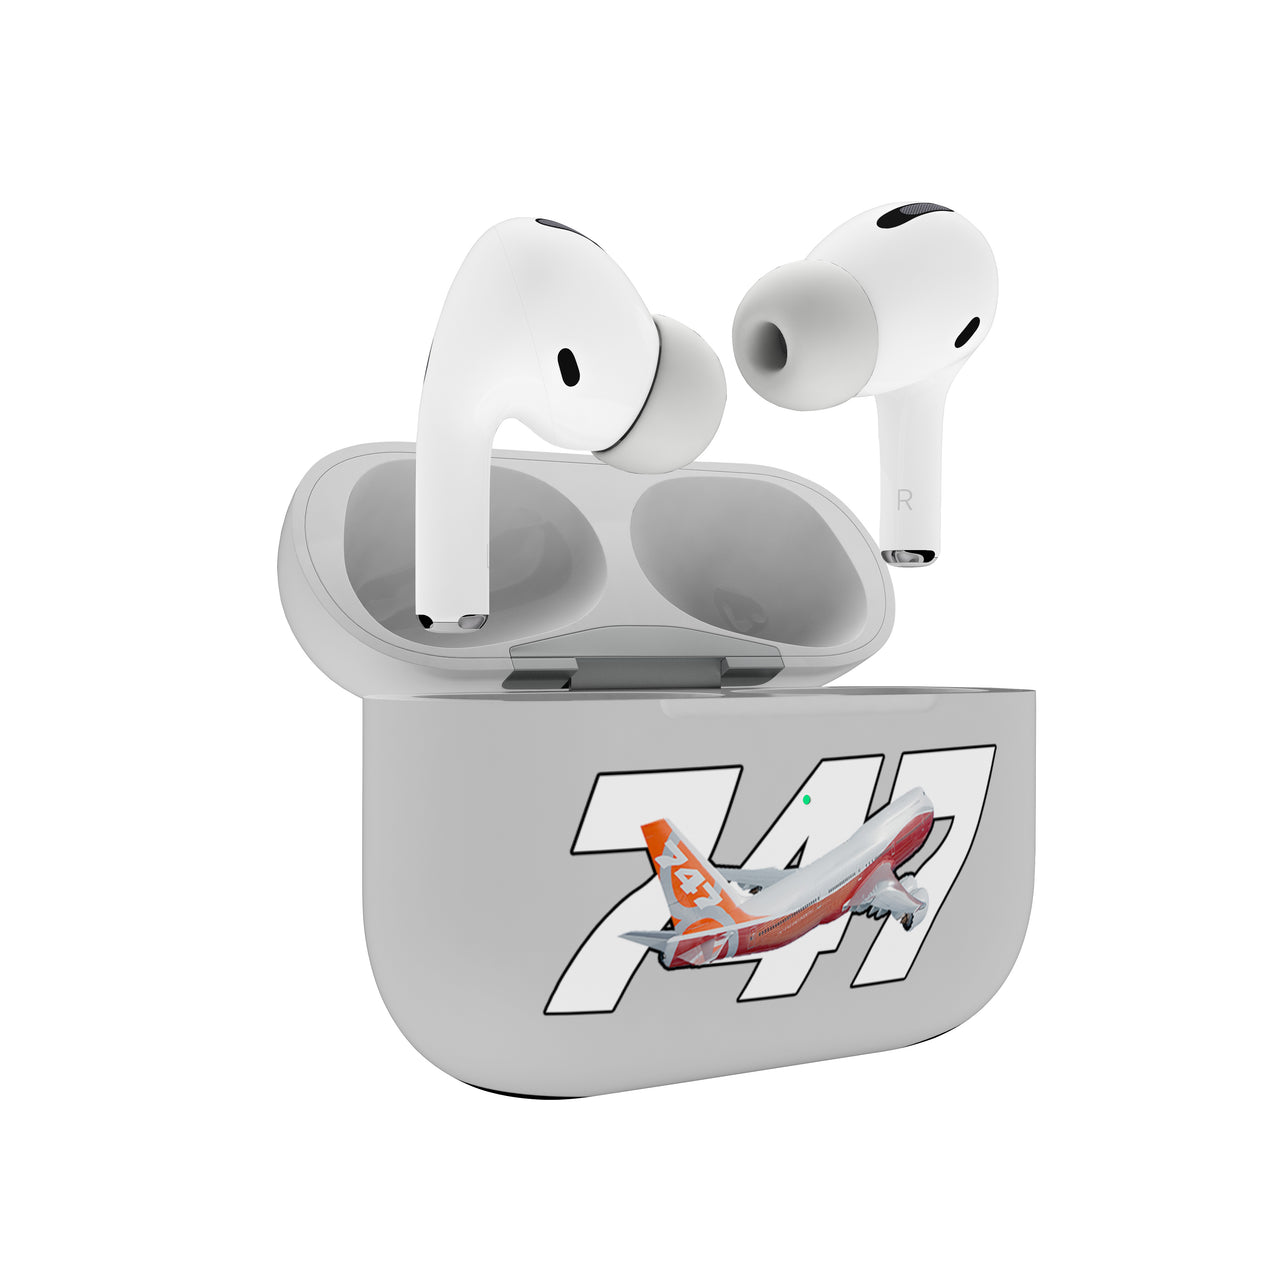 Super Boeing 747 Intercontinental Designed AirPods "Pro" Cases